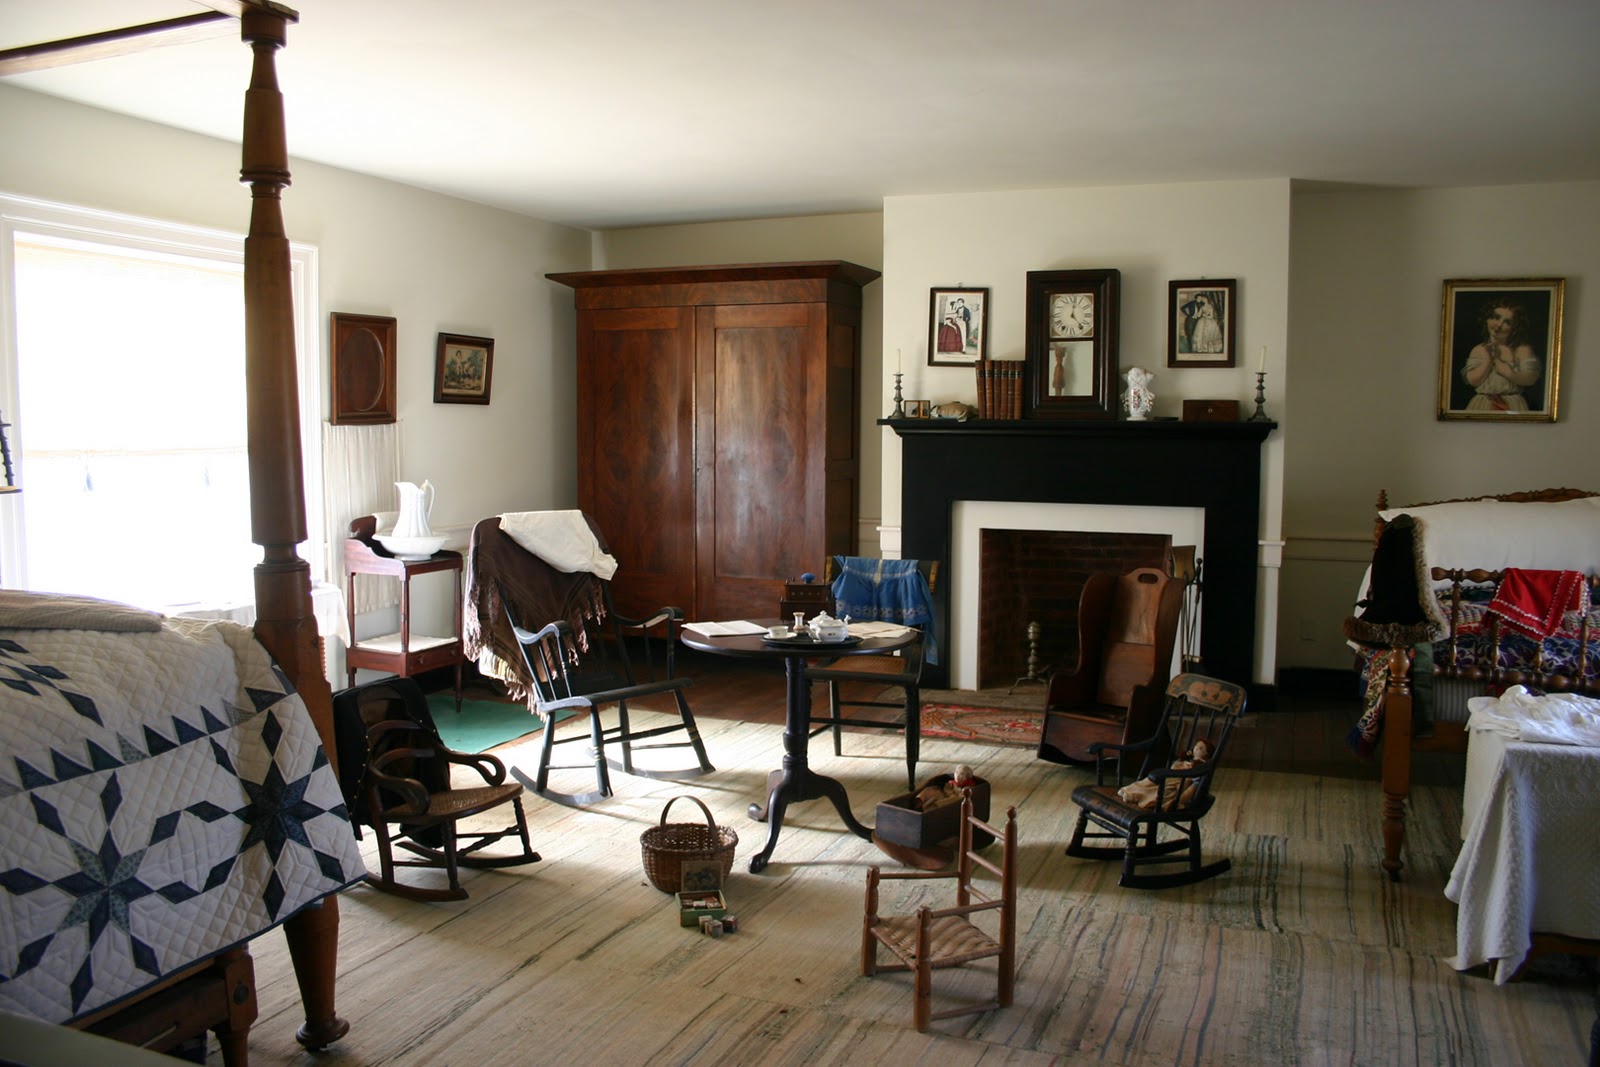 Never a Wrong Turn (Ever): Appomattox Courthouse, Virginia